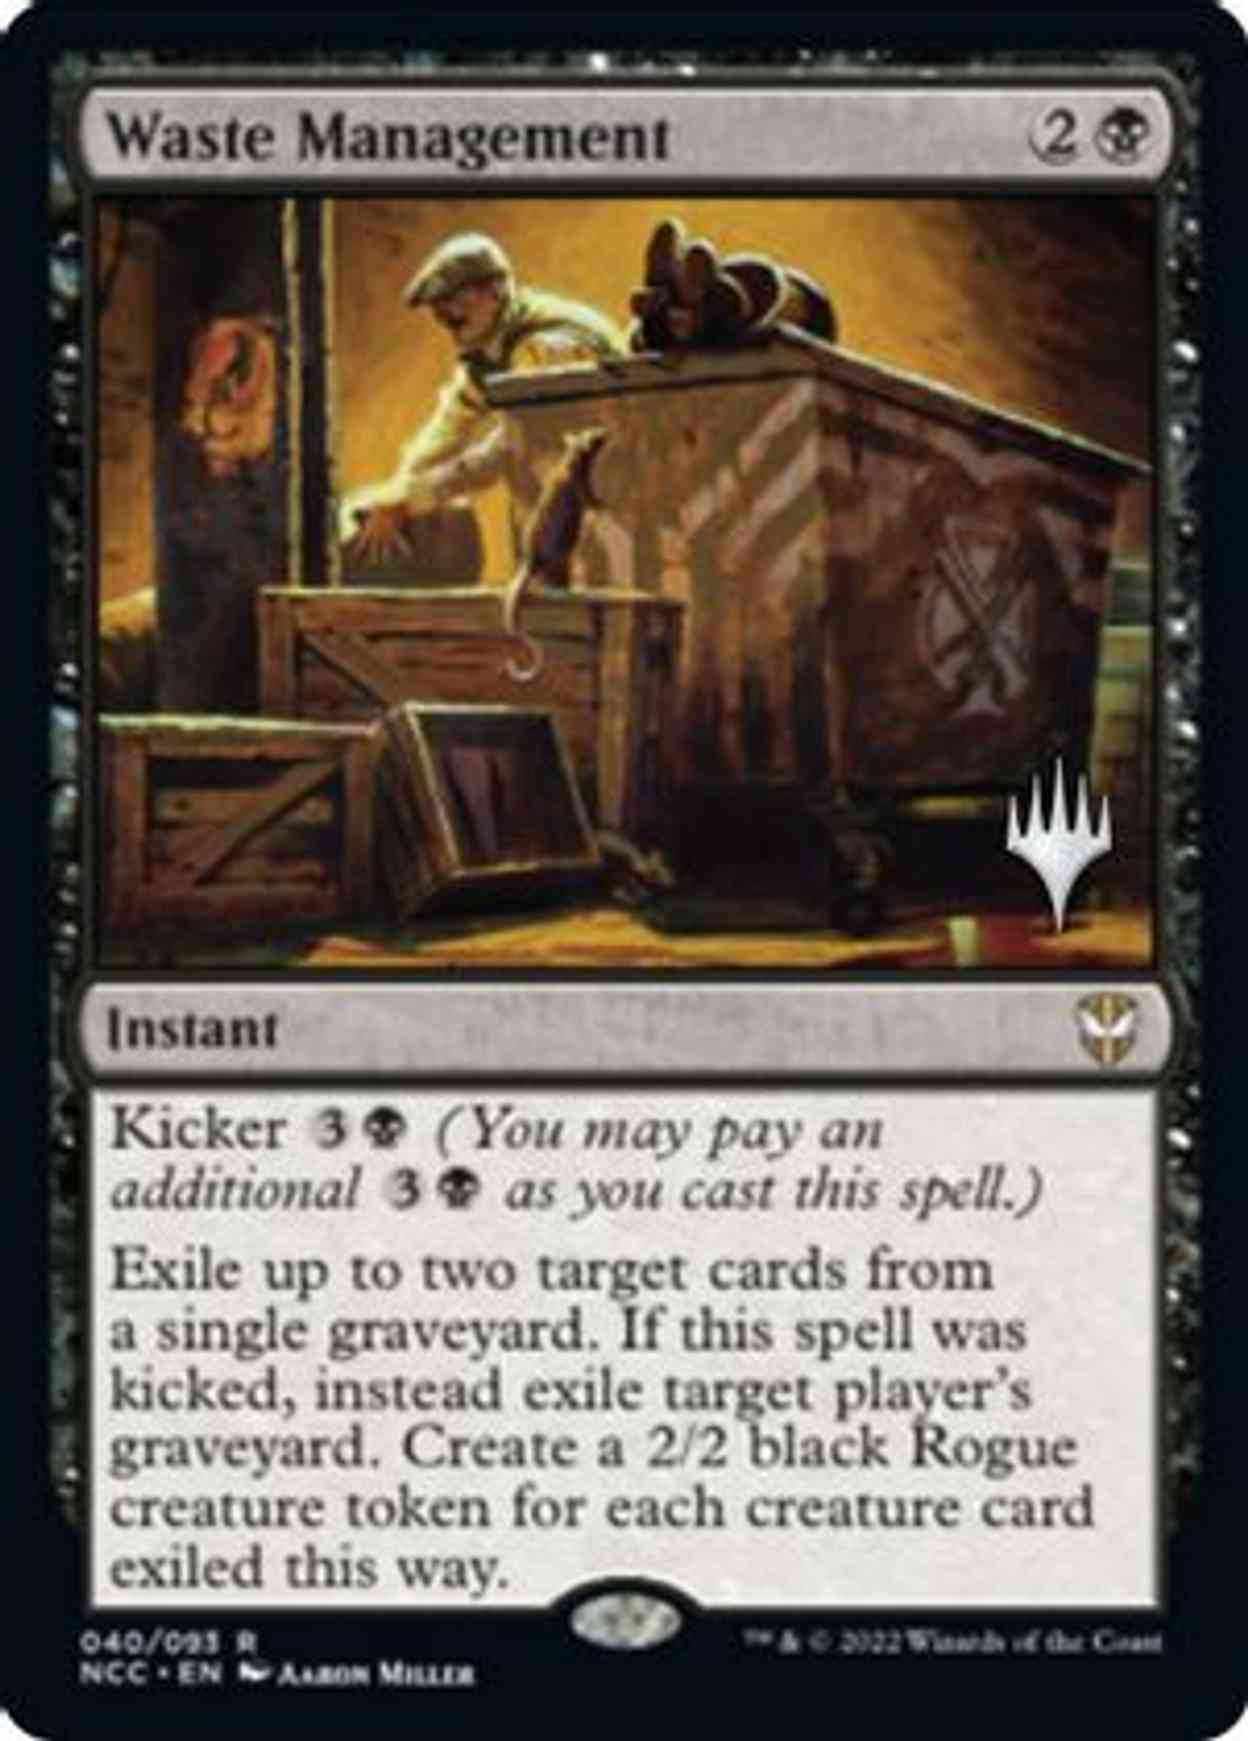 Waste Management magic card front